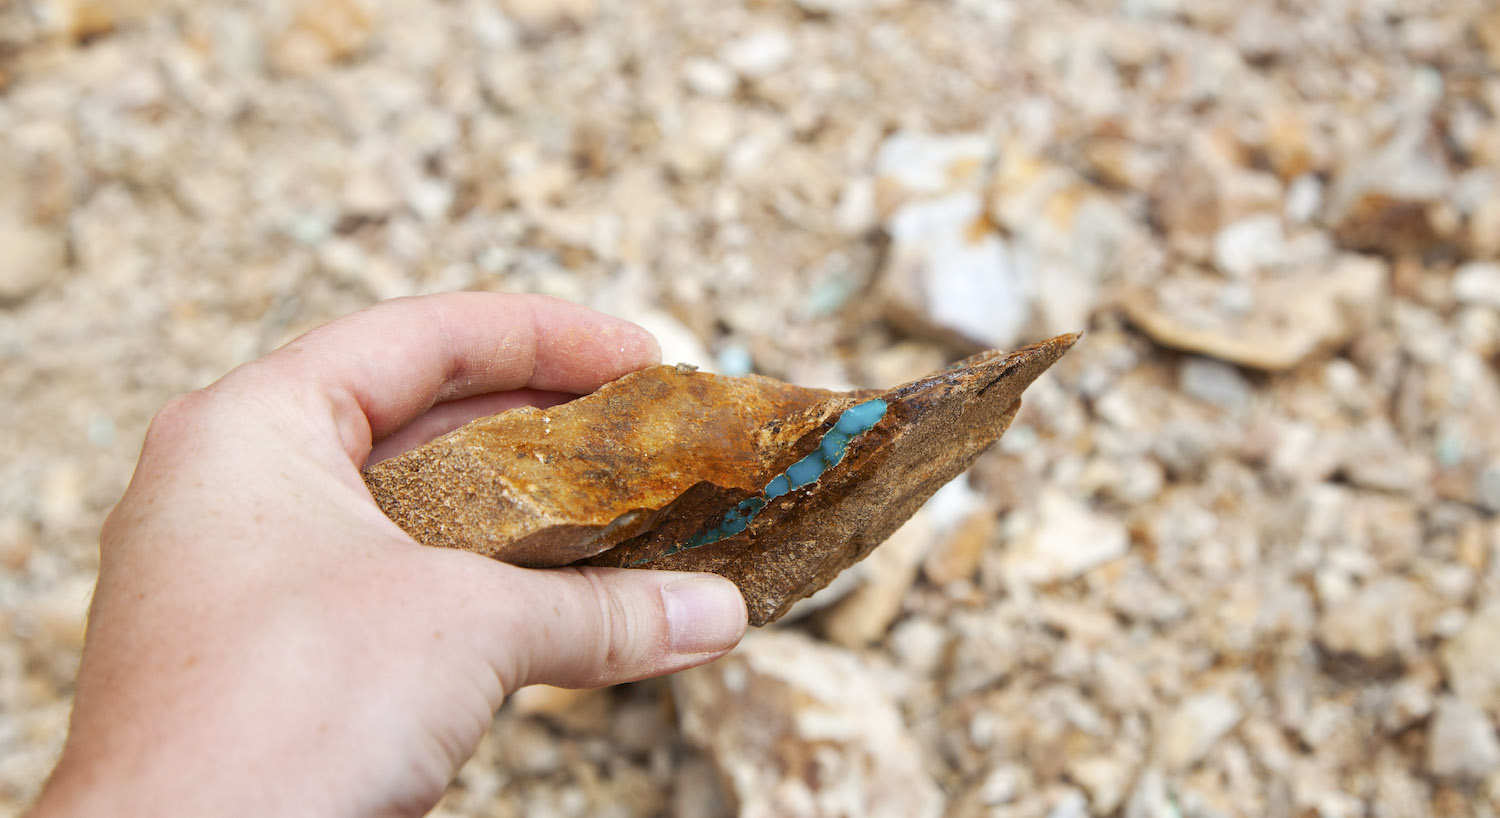 Member of the Otteson family holding a piece of turquoise-threaded rock in Tonopah, Nevada